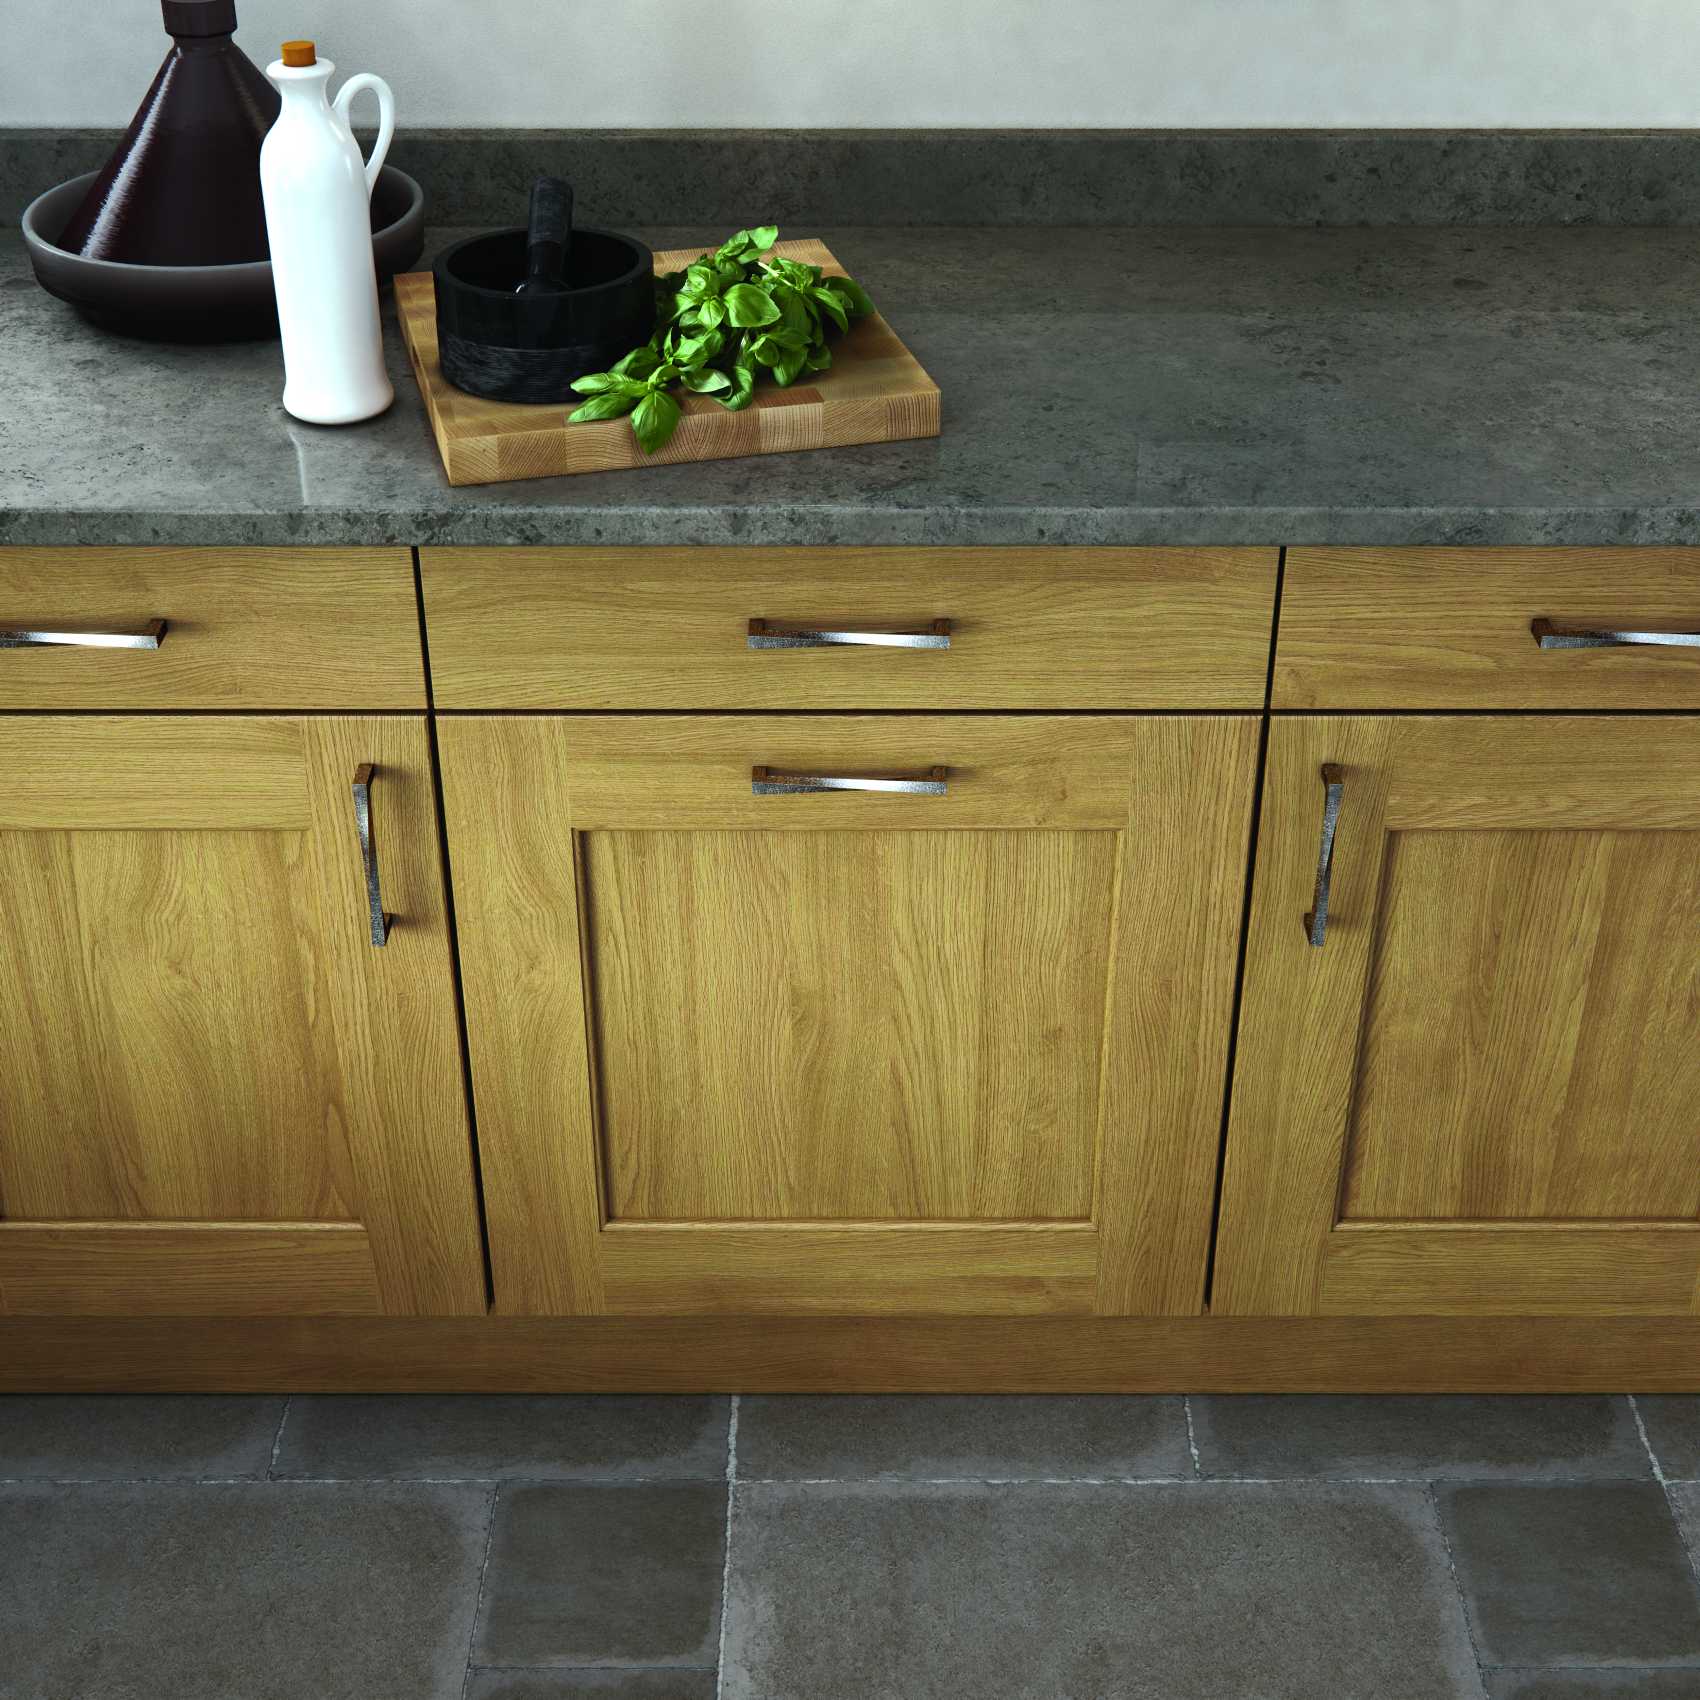 Light oak and stone painted contemporary shaker kitchen handle and worktop detail